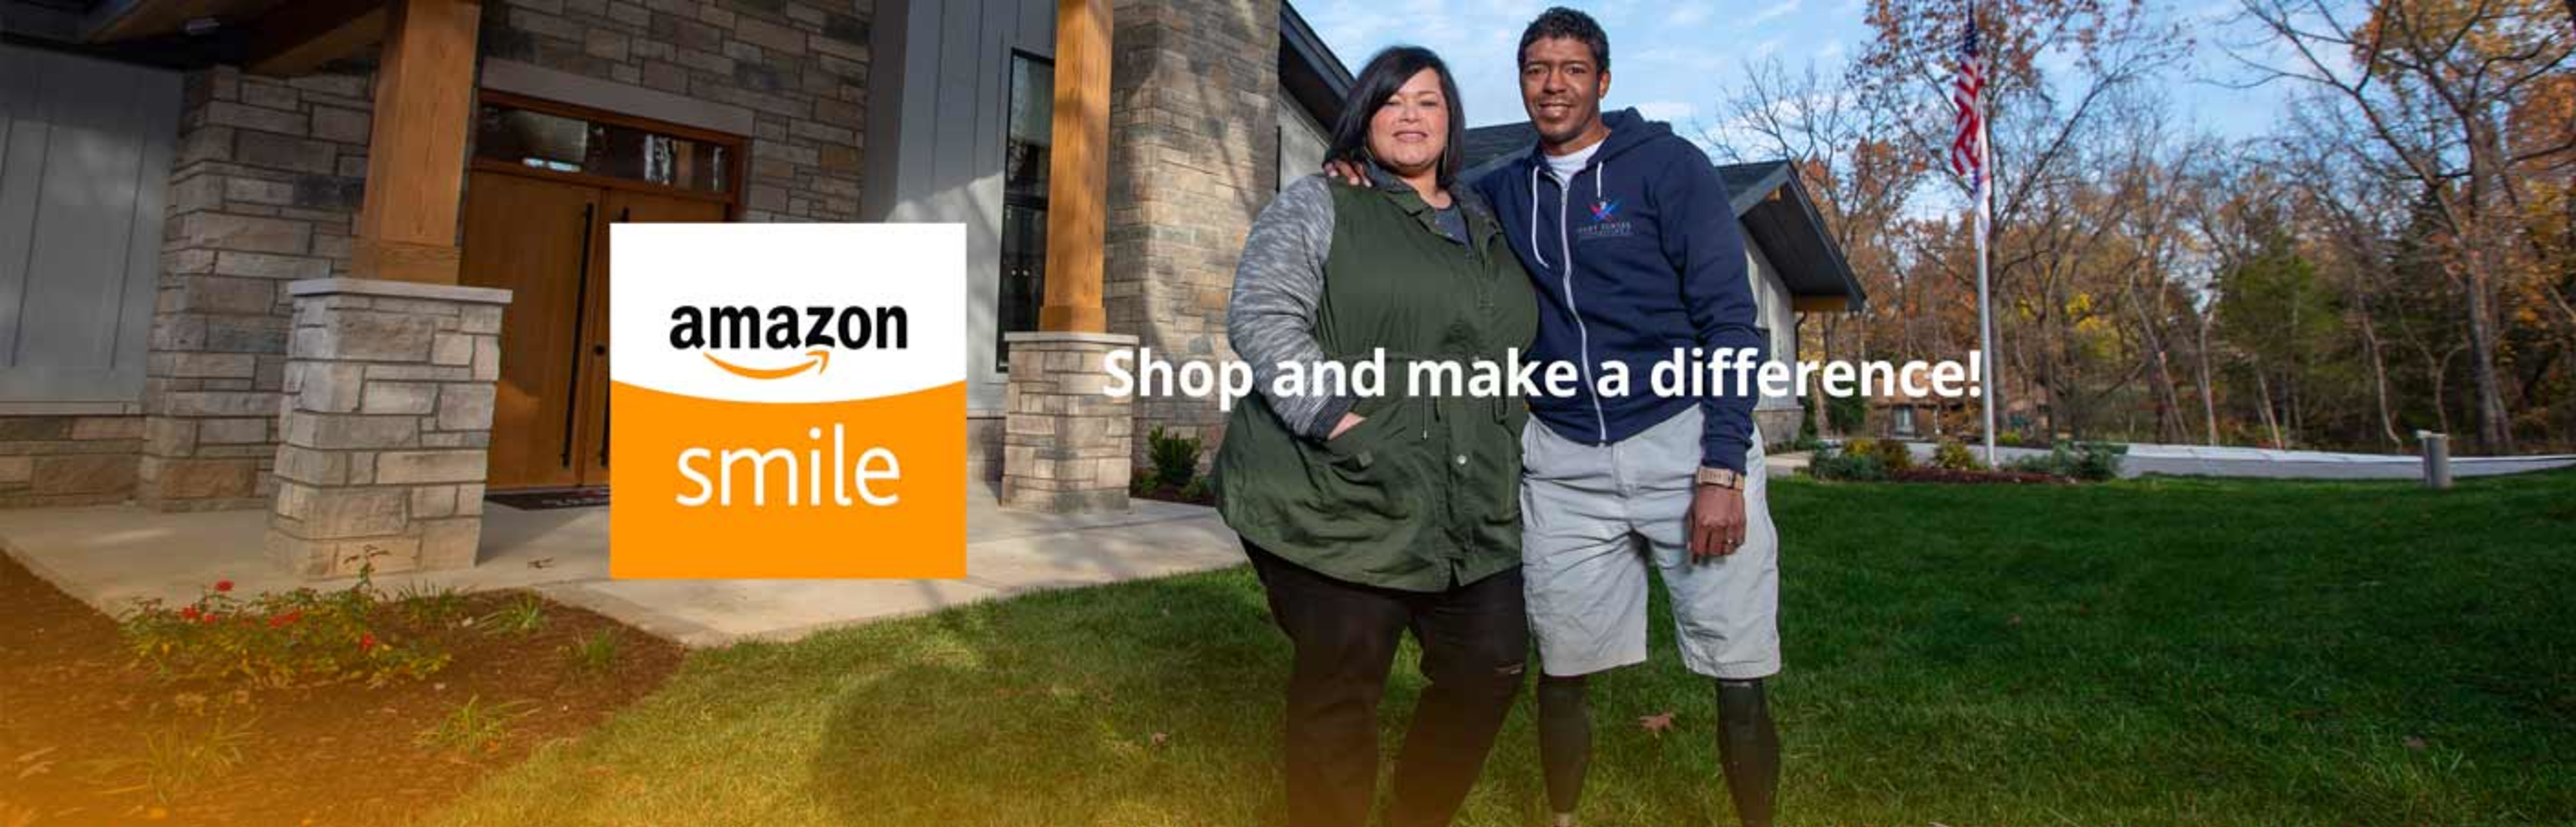 Amazon Smile - Shop and Make a Difference